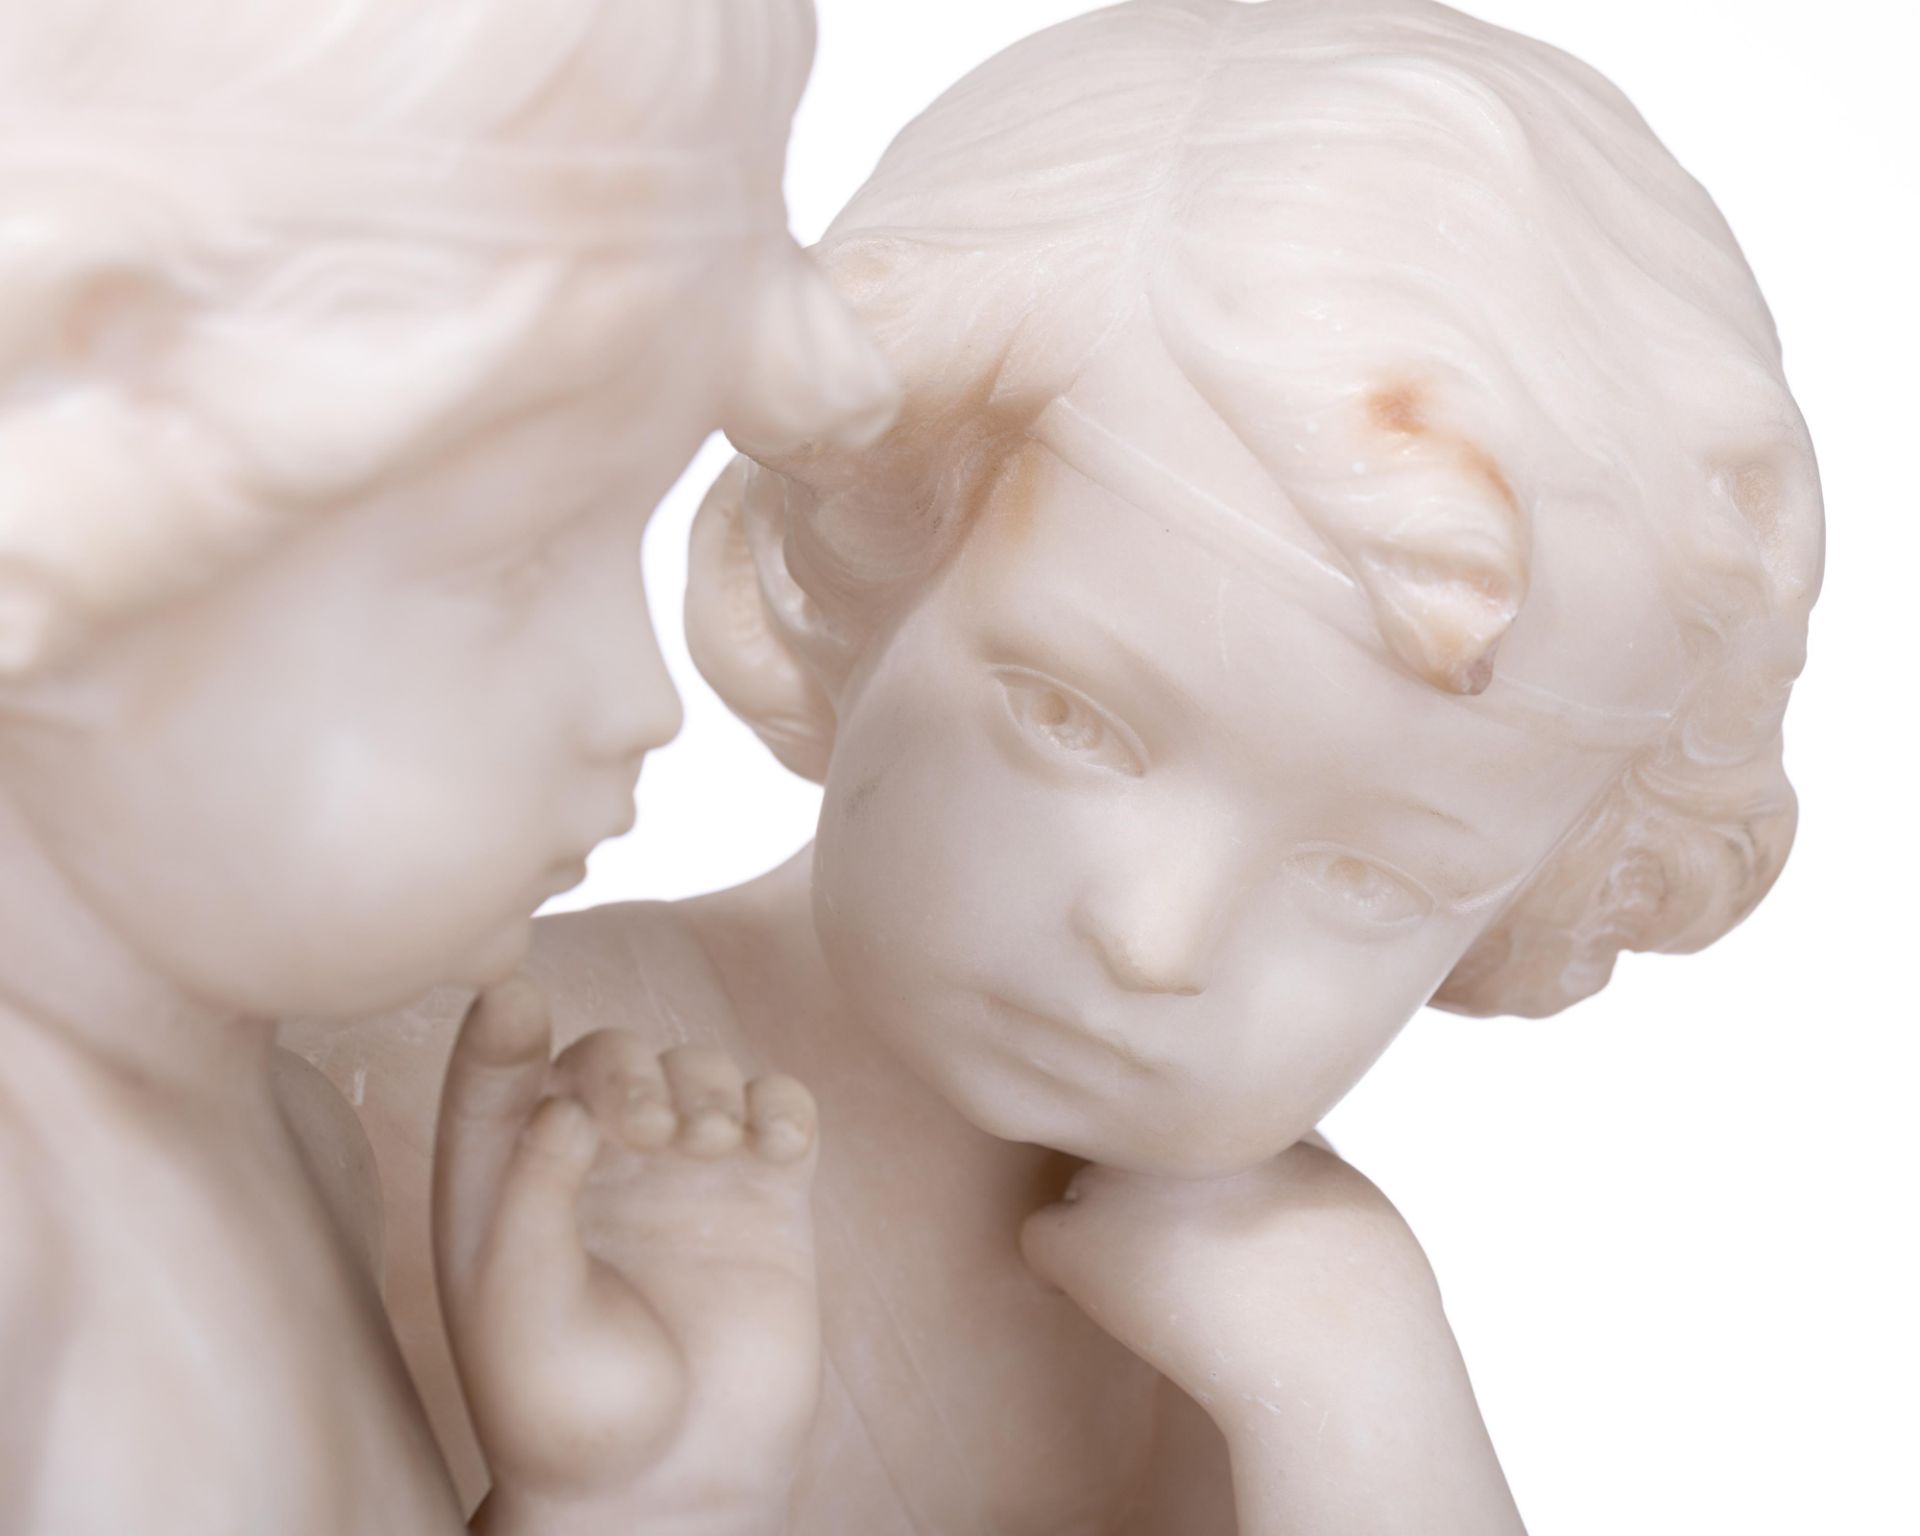 Pugi G., a Carrara marble group, depicting Amor and Psyche as children, H 45,5 cm - Image 6 of 11